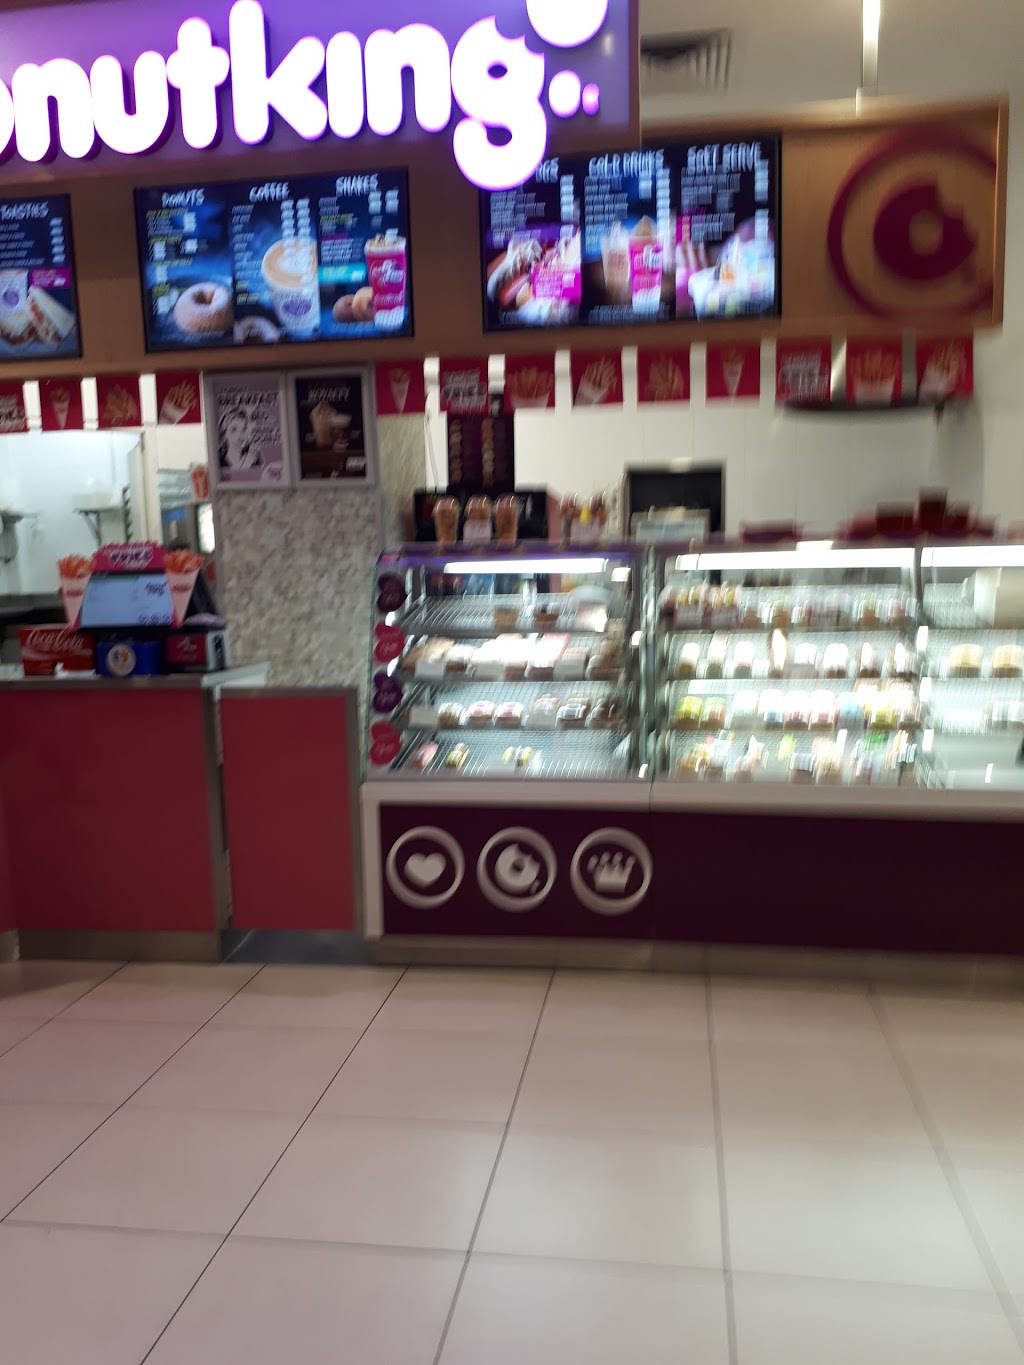 Donut King | FC015, Canterbury Rd, Forest Hill VIC 3131, Australia | Phone: (03) 9894 2919